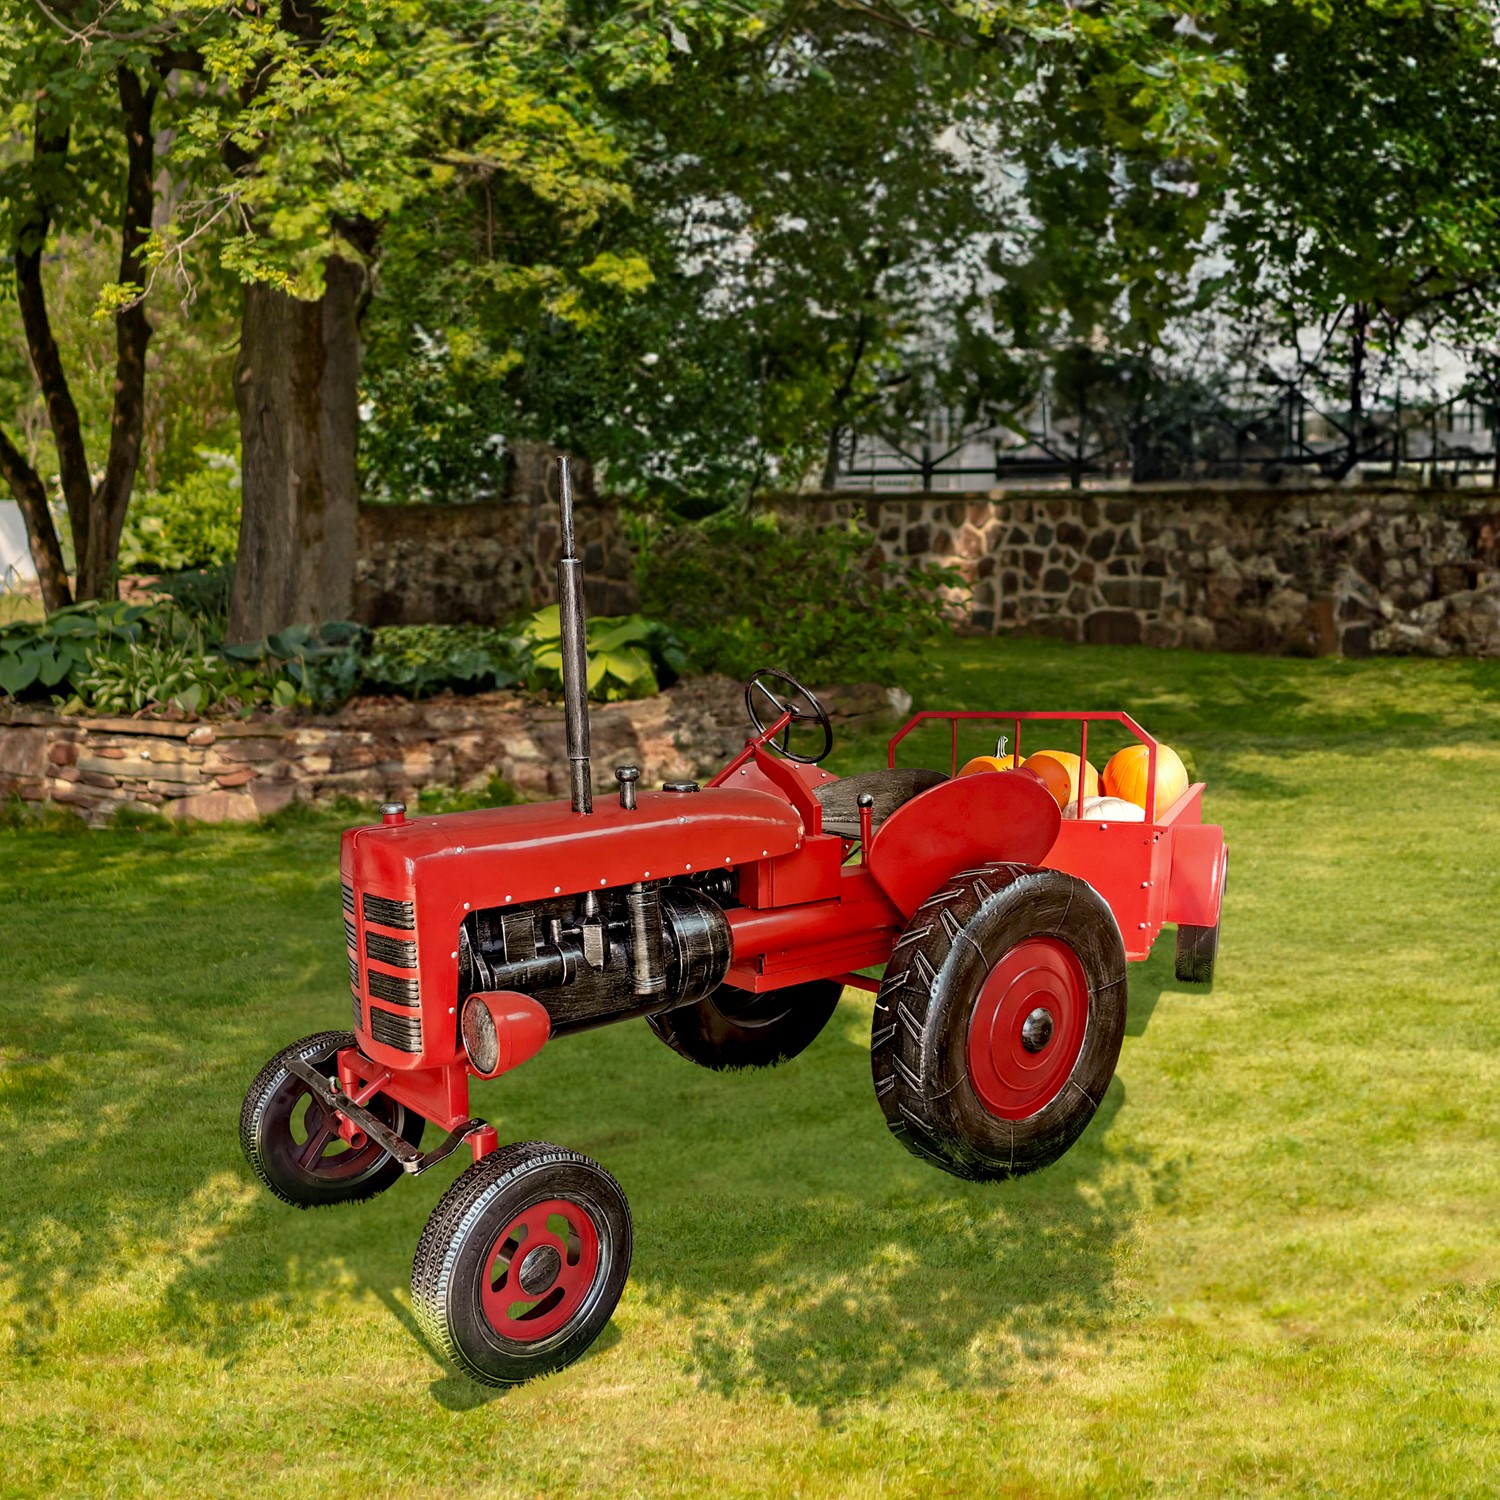 Red Tractor Collectible Miniature, Vintage Metal Tractor